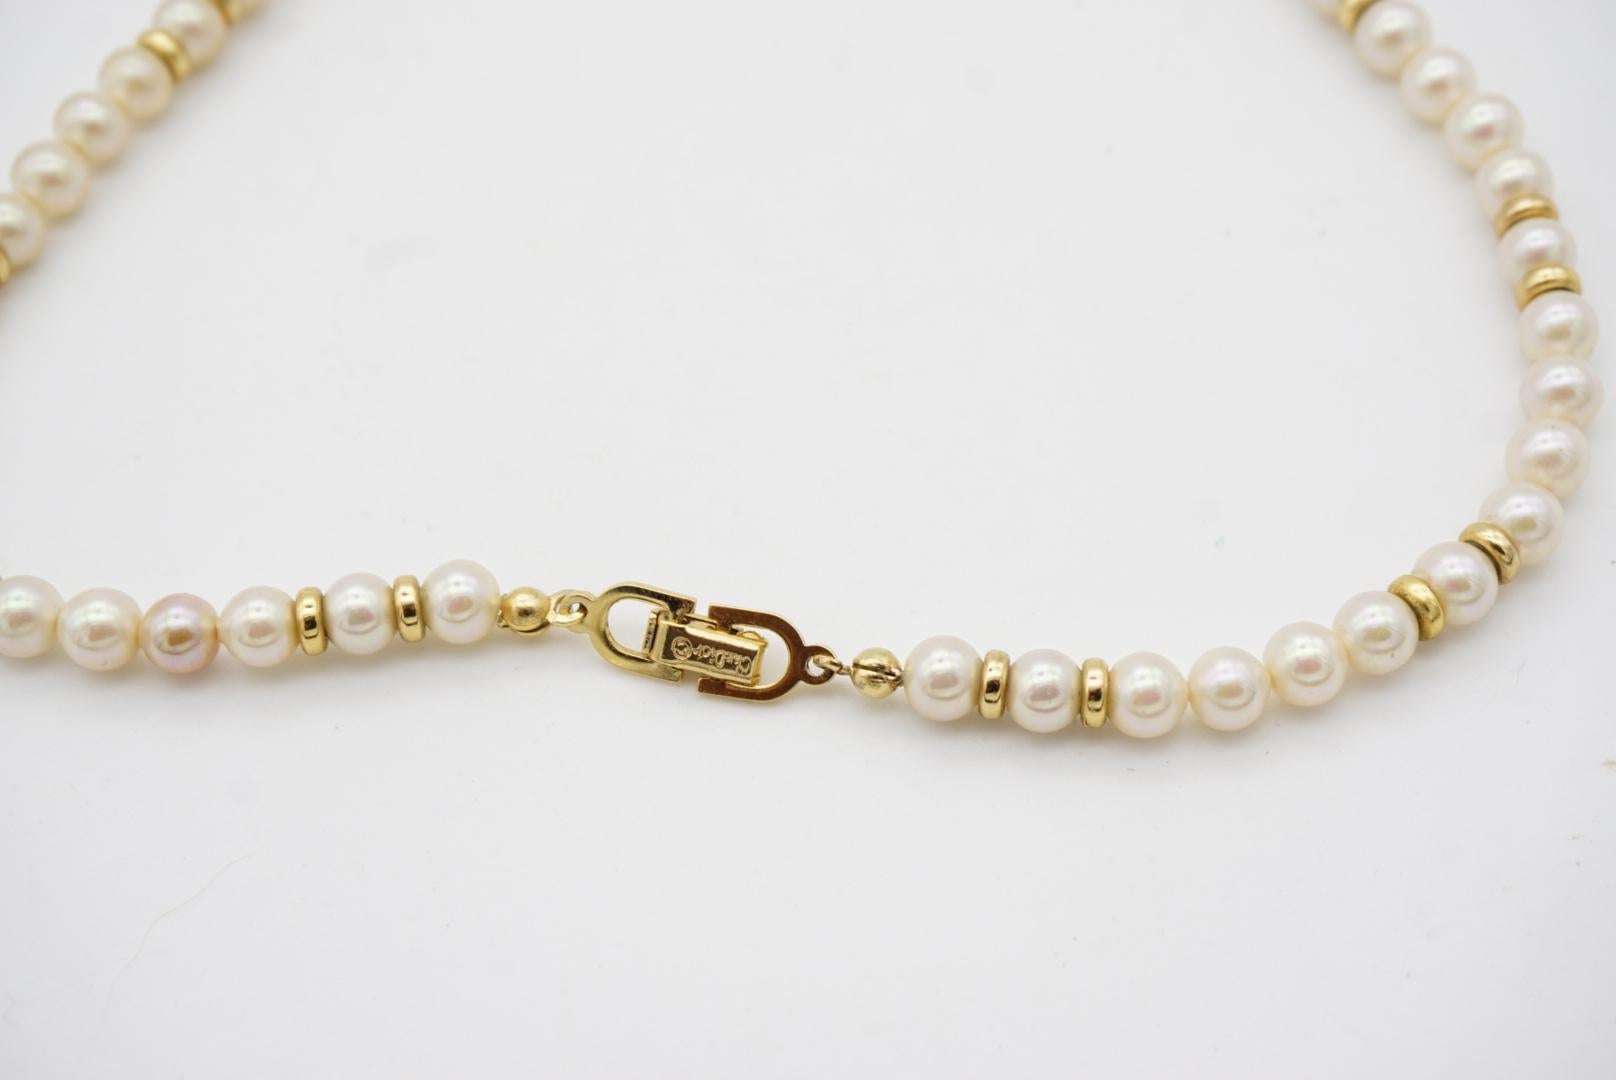 Christian Dior Vintage 1980s White Round Oval Pearl Crystals Pendant Necklace For Sale 11